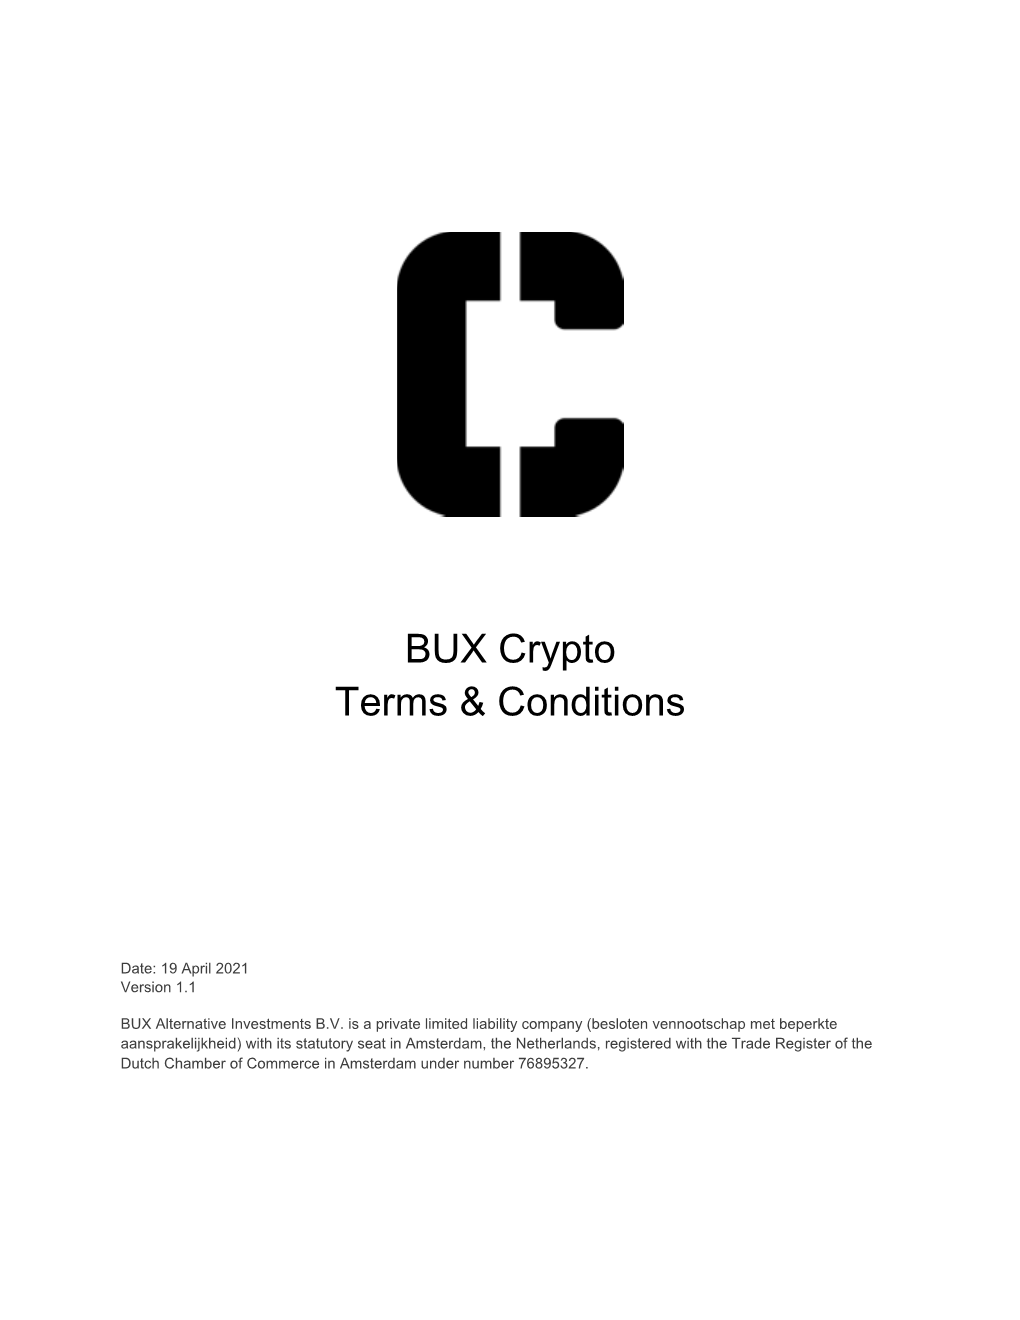 BUX Crypto Terms & Conditions